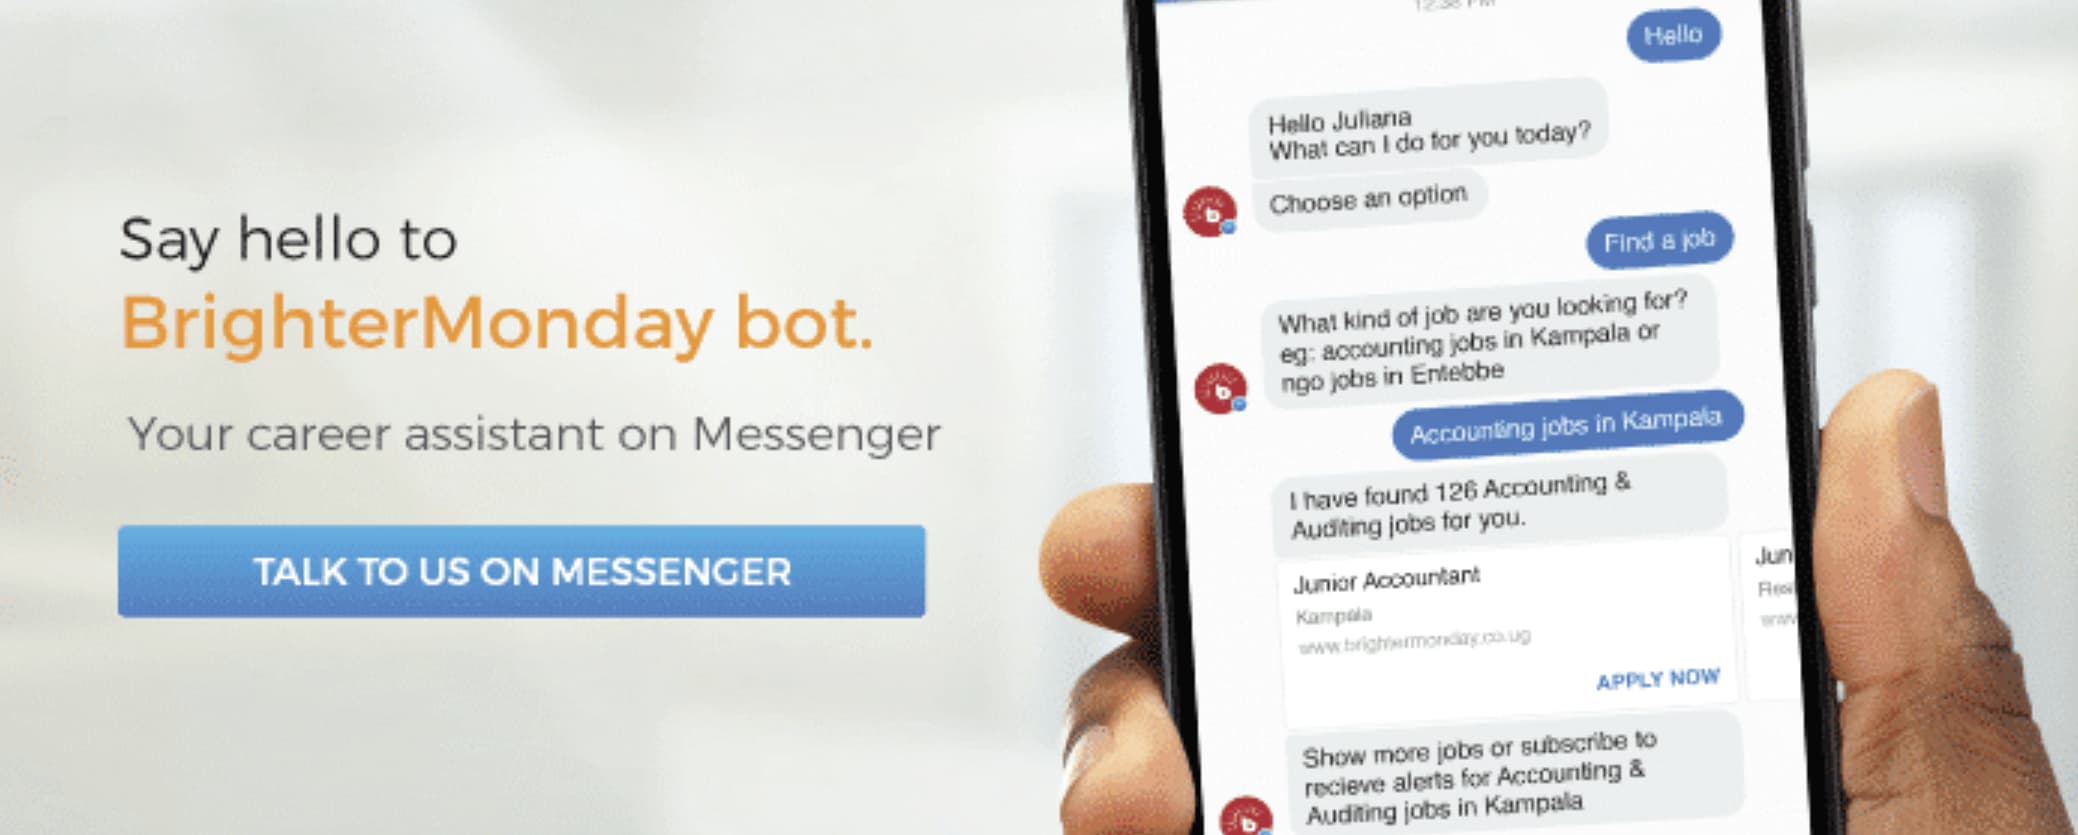 brightermonday.jpg?width=2078&height=835&name=brightermonday - 30 Best Bots for Marketers in 2023